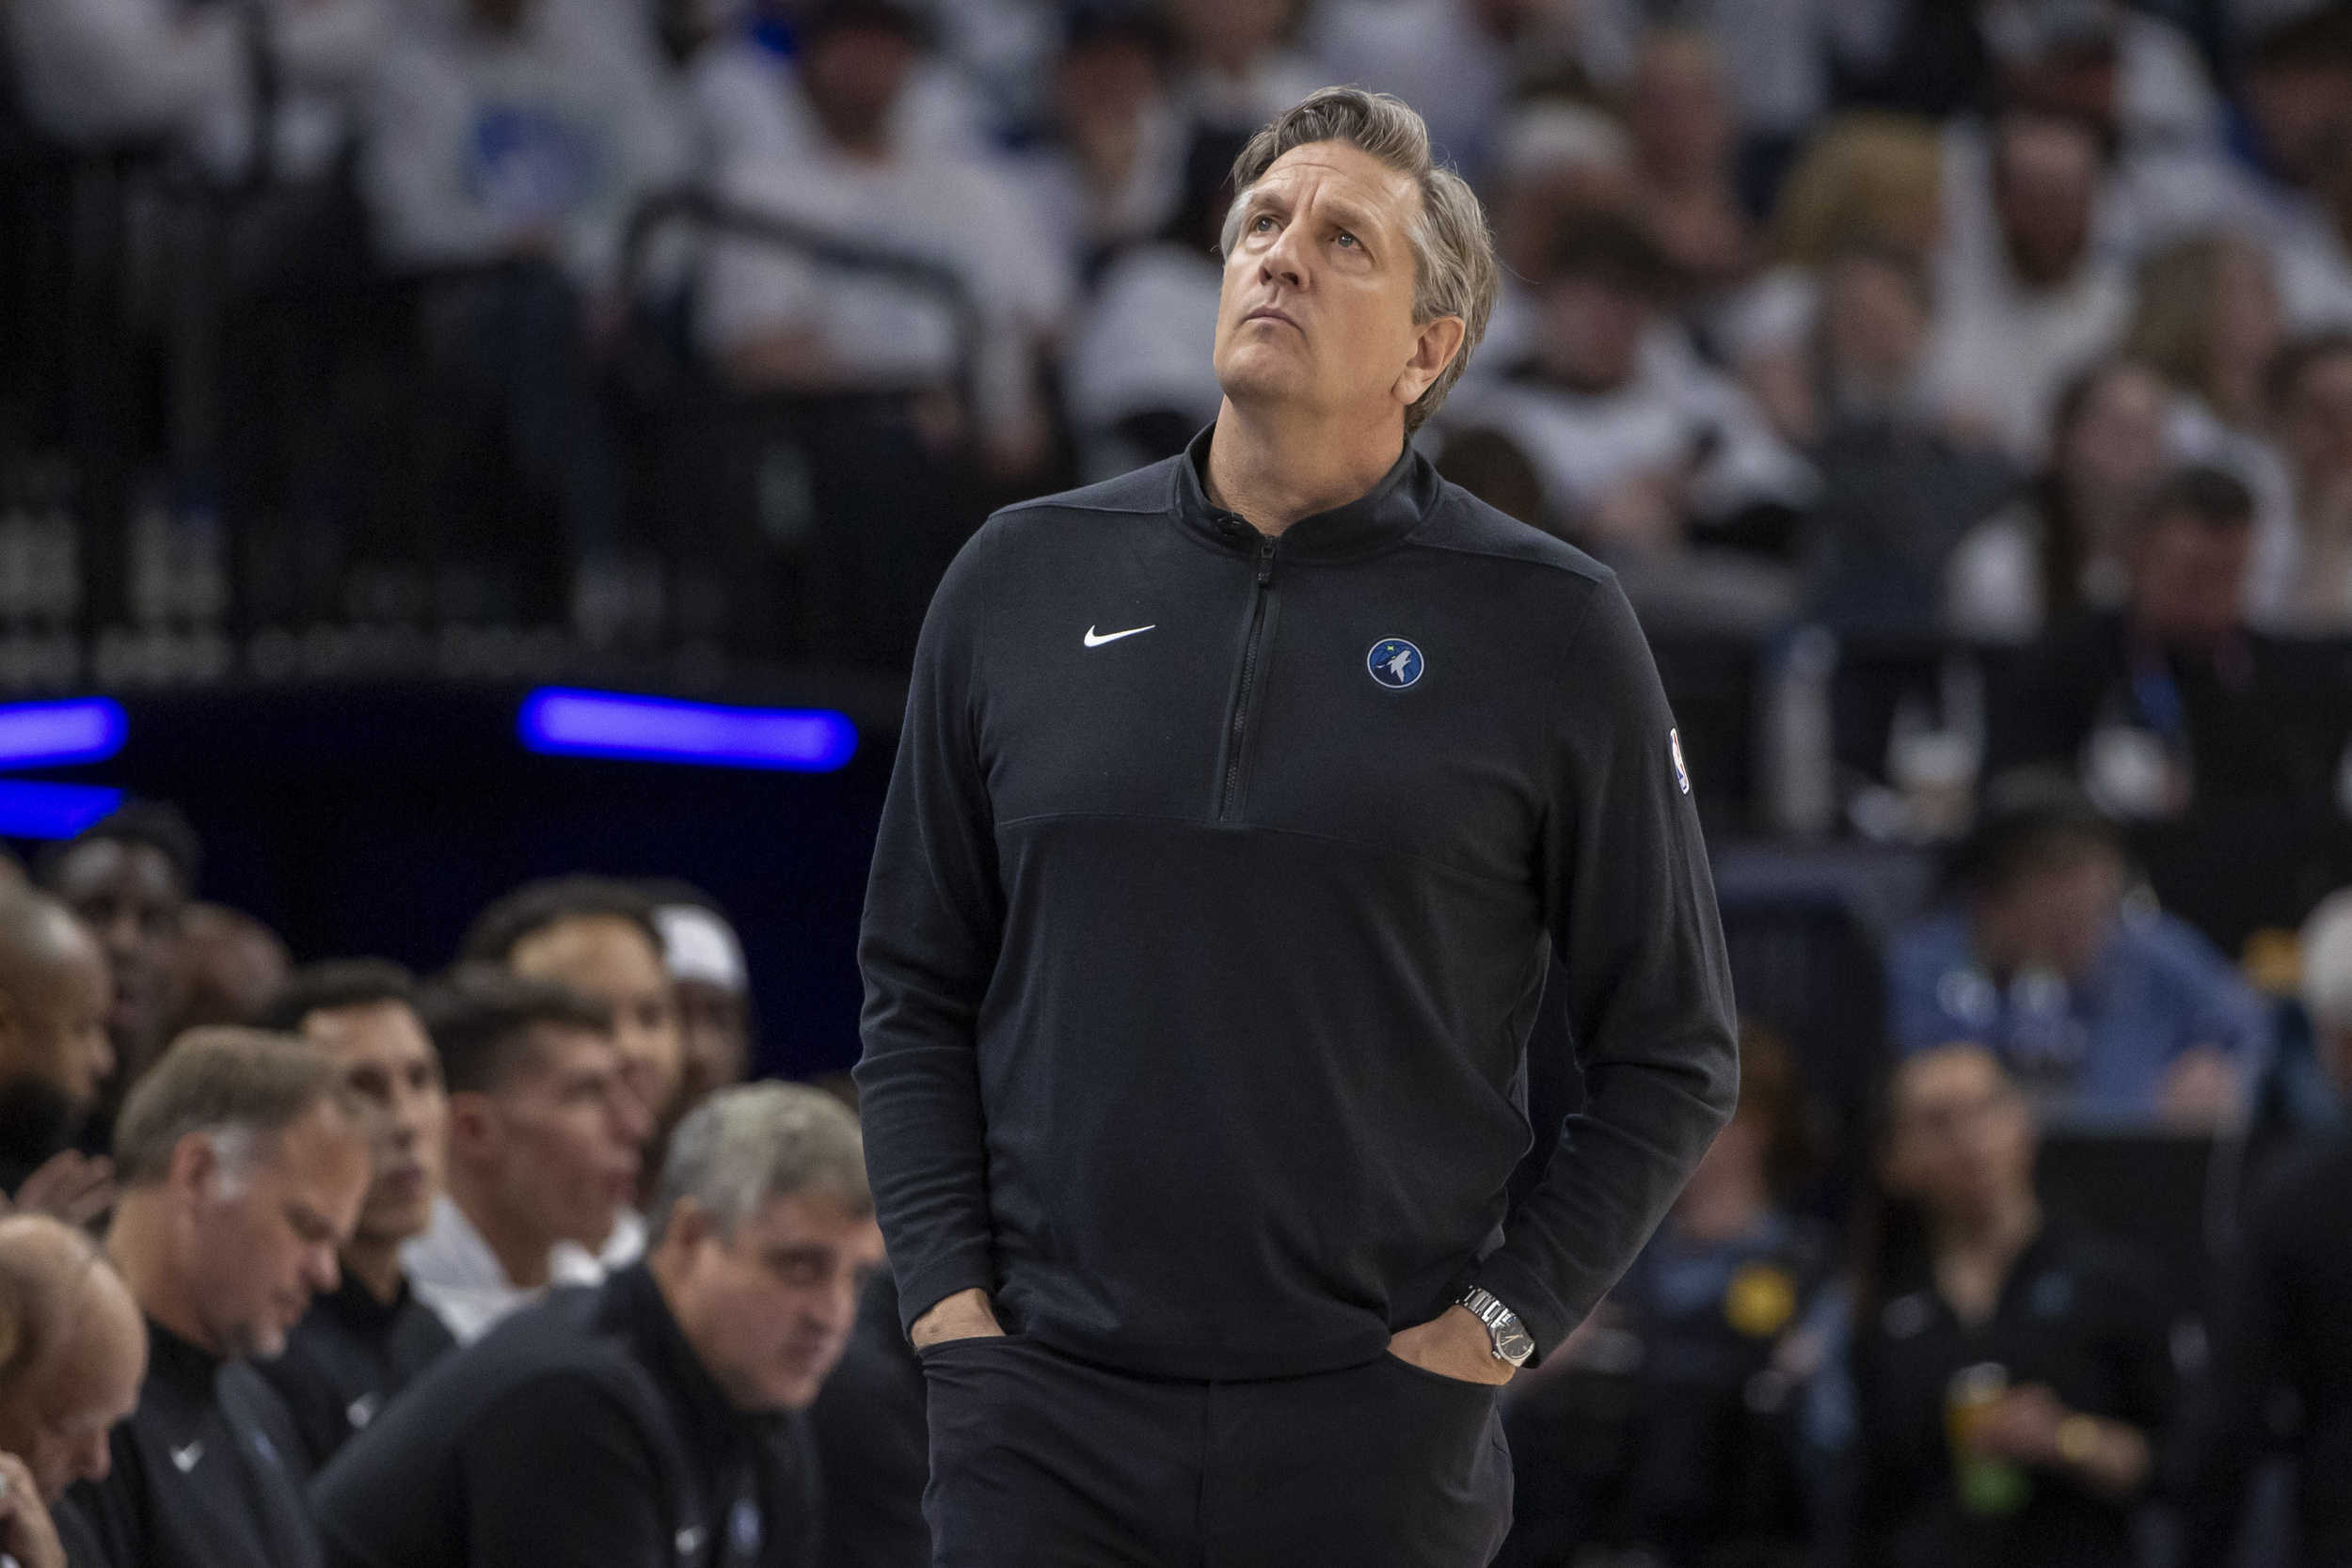 timberwolves coach chris finch to undergo surgery after sideline collision